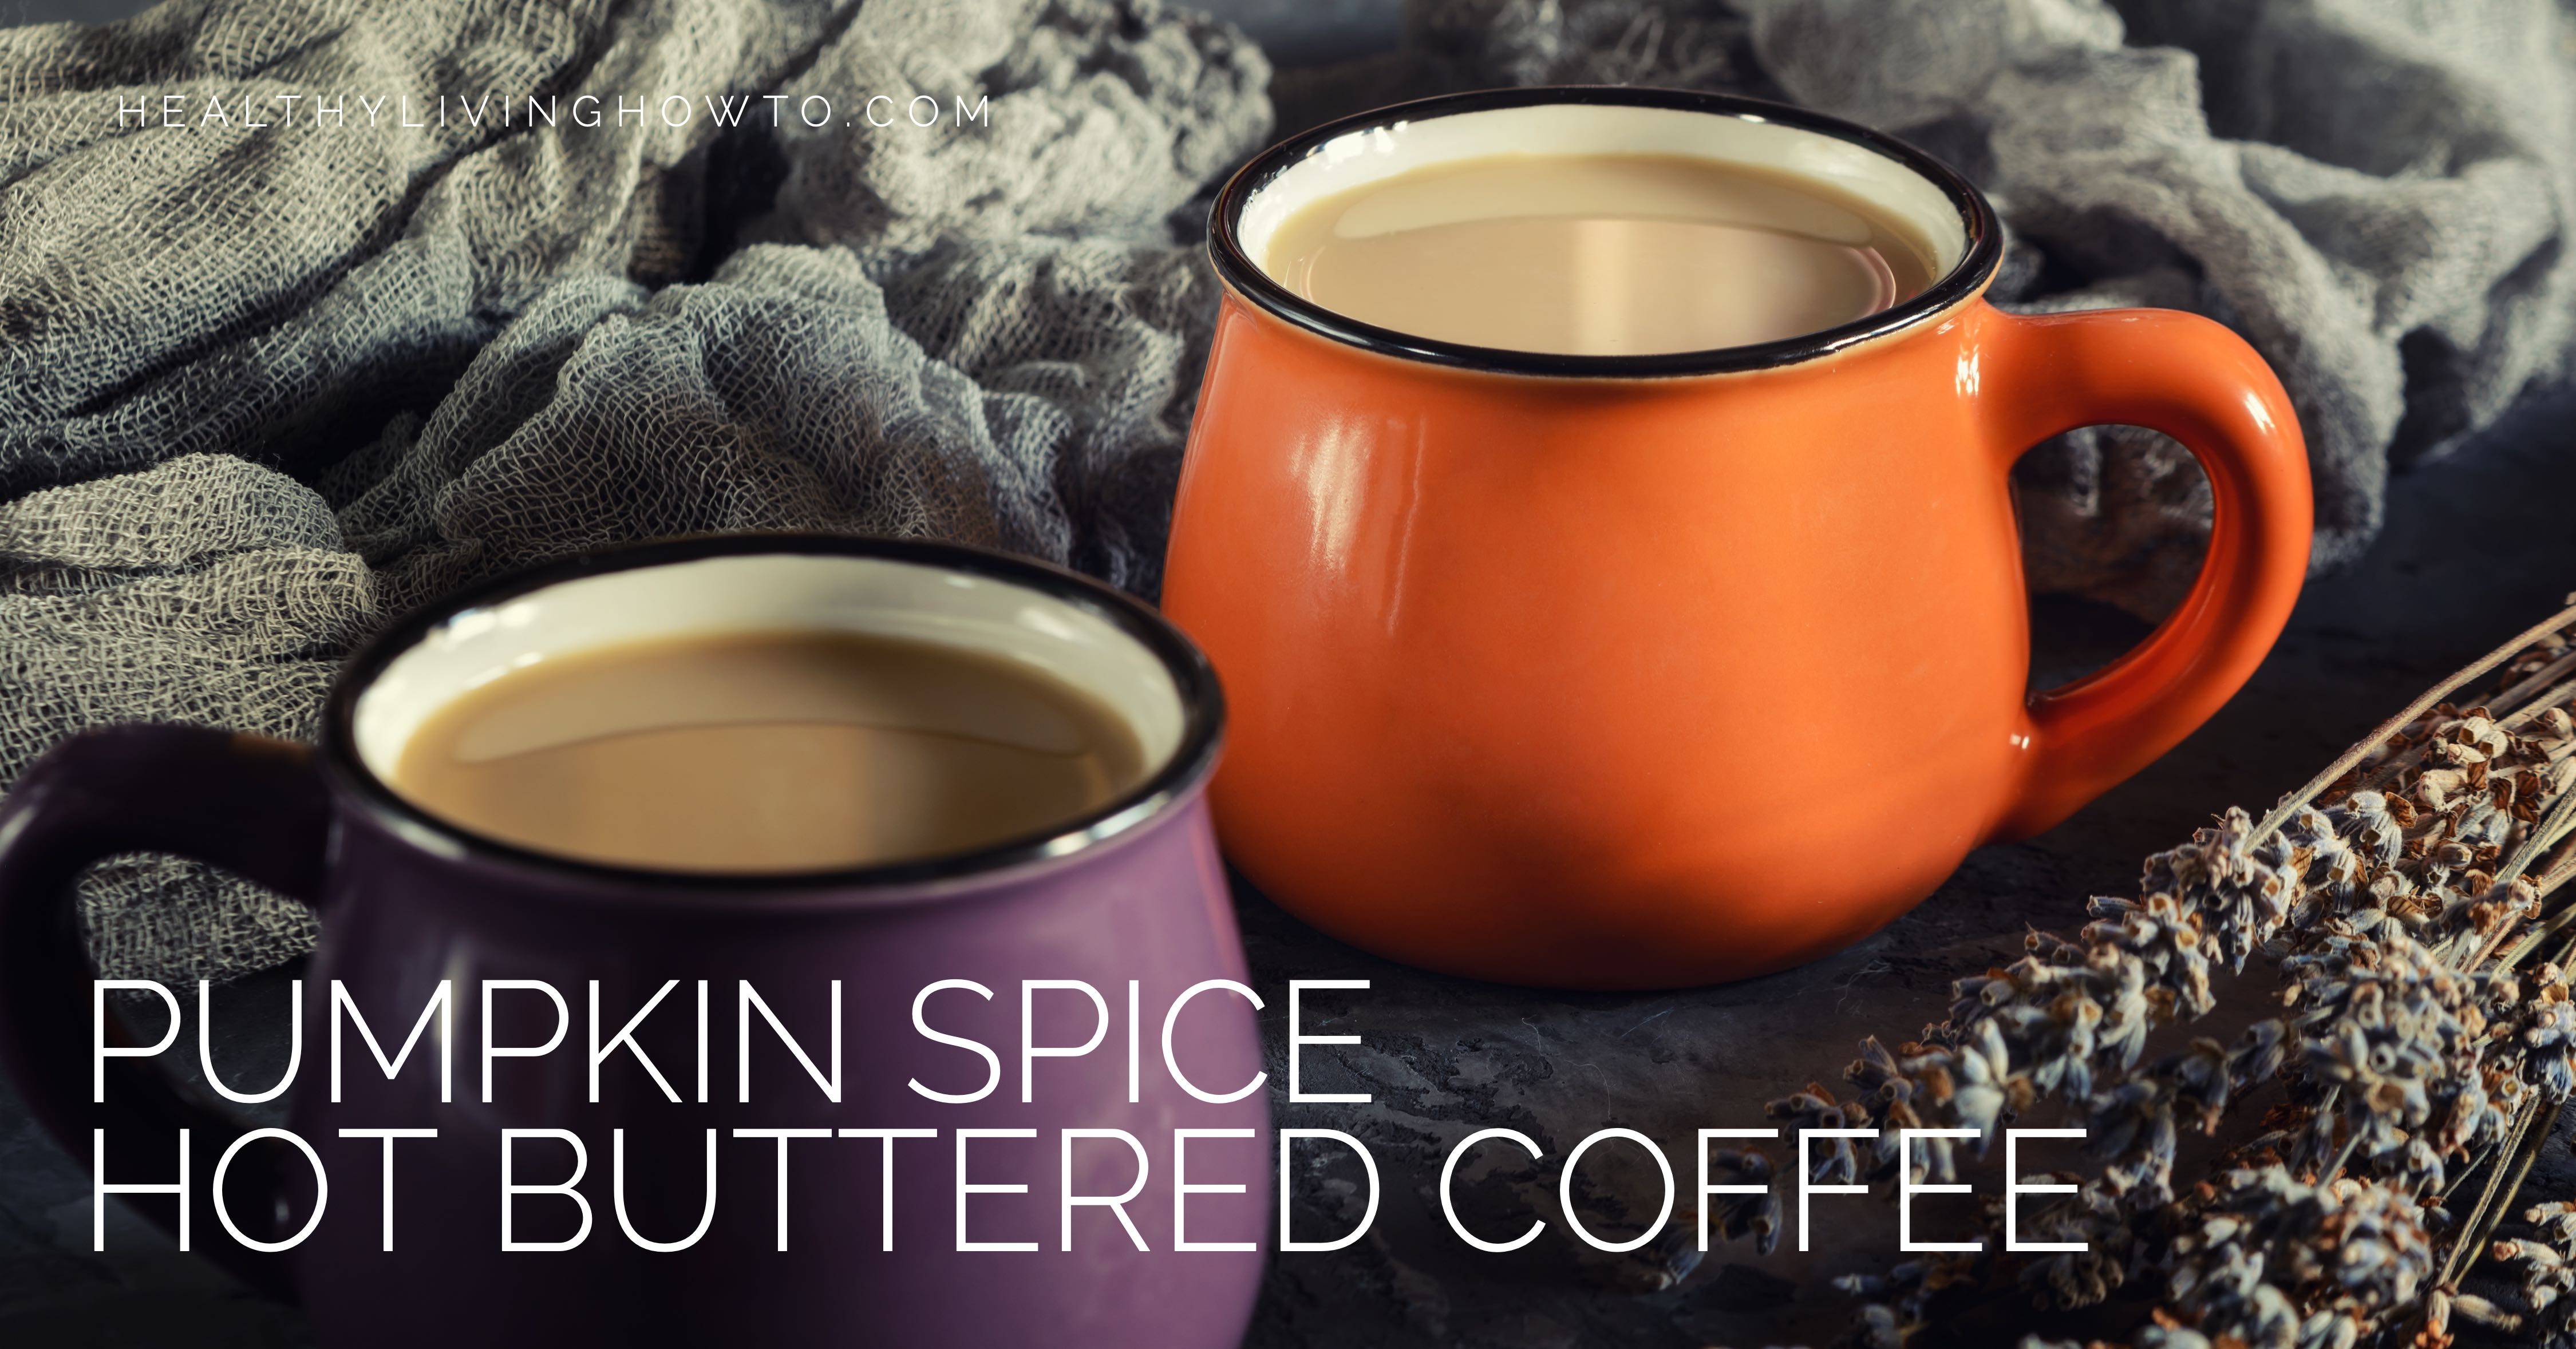 Pumpkin Spice Hot Buttered Coffee | healthylivinghowto.com